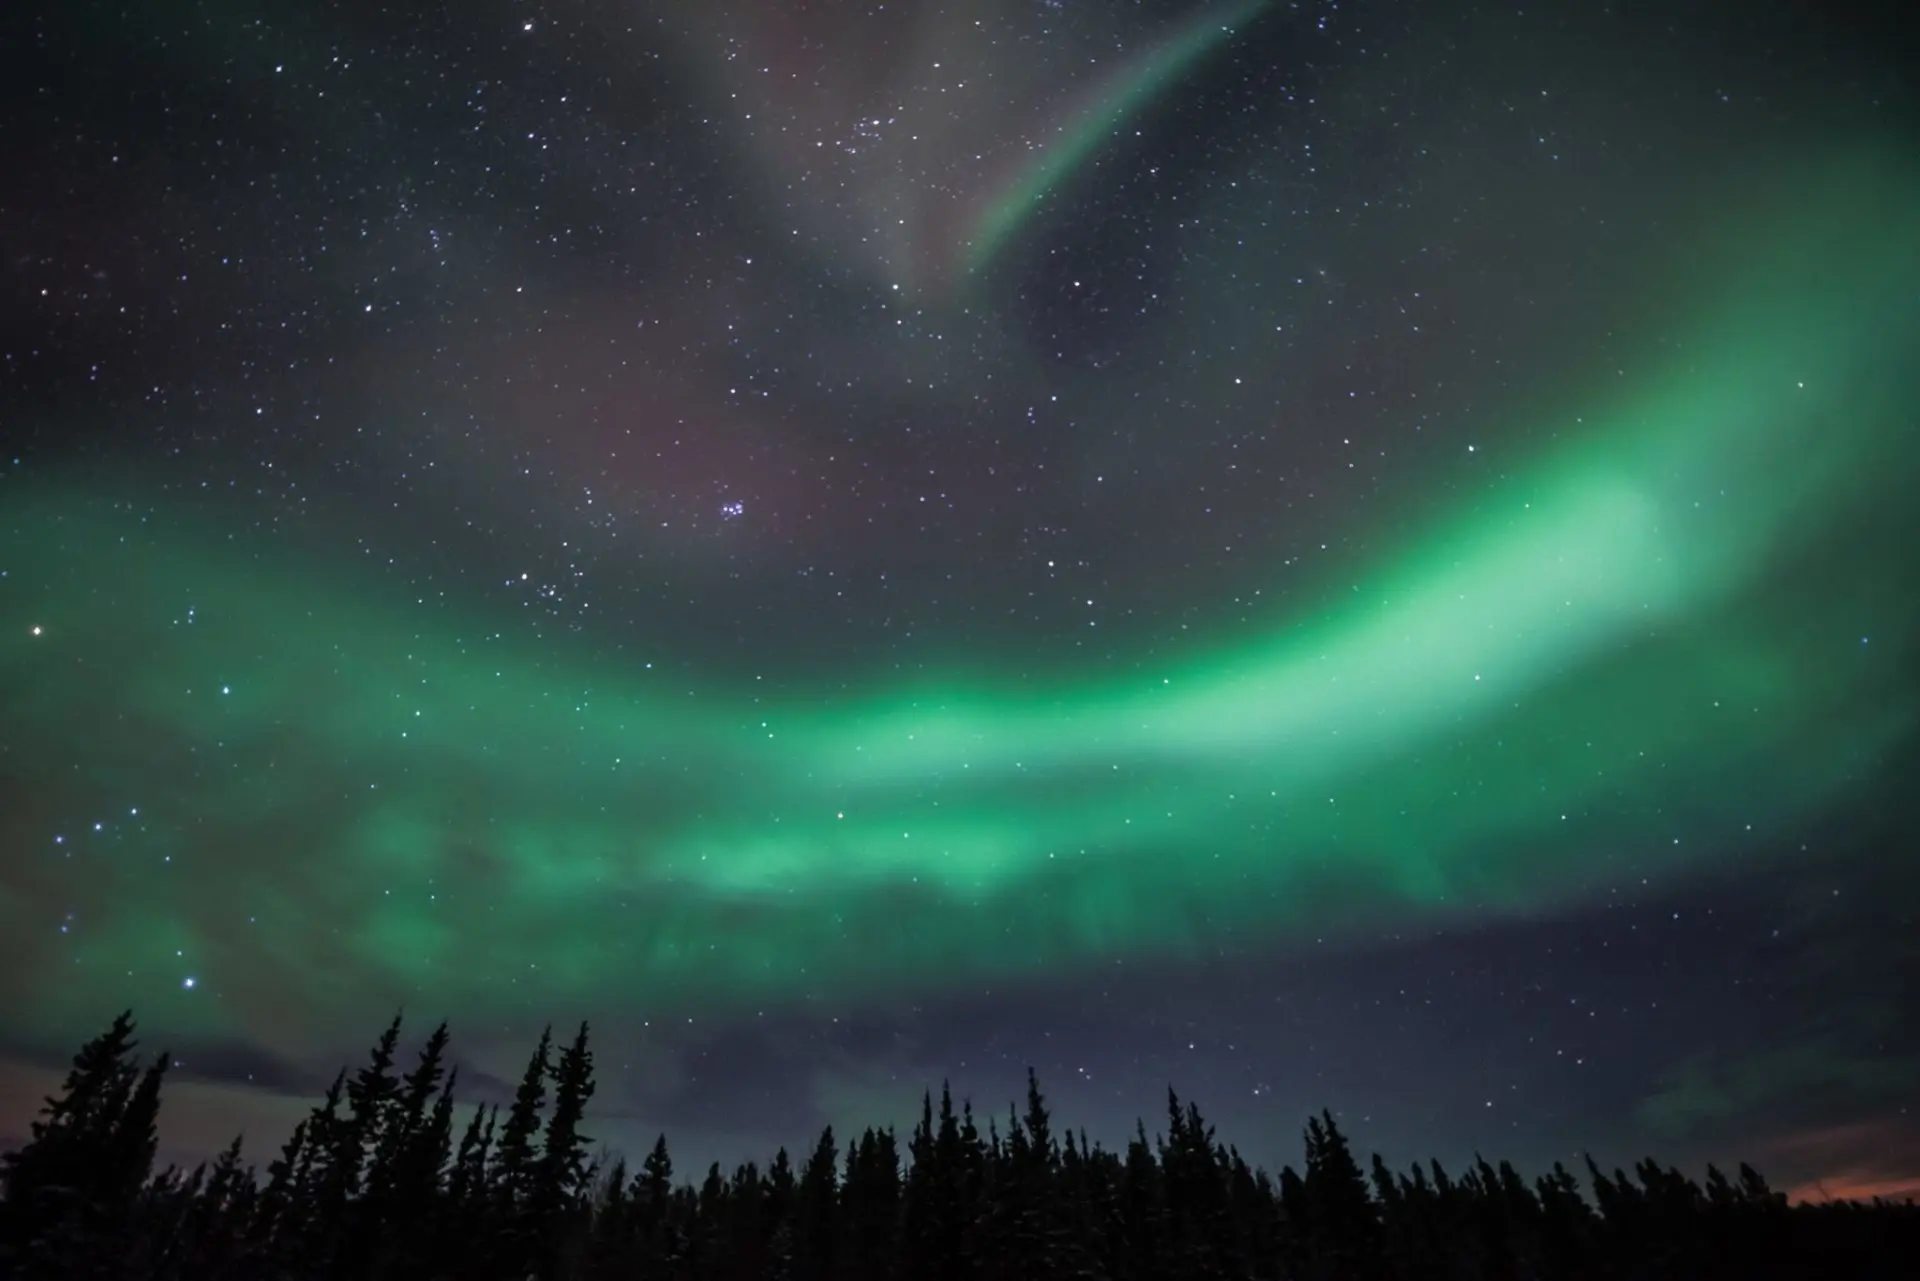 How earthquake detectors can be used to study northern lights